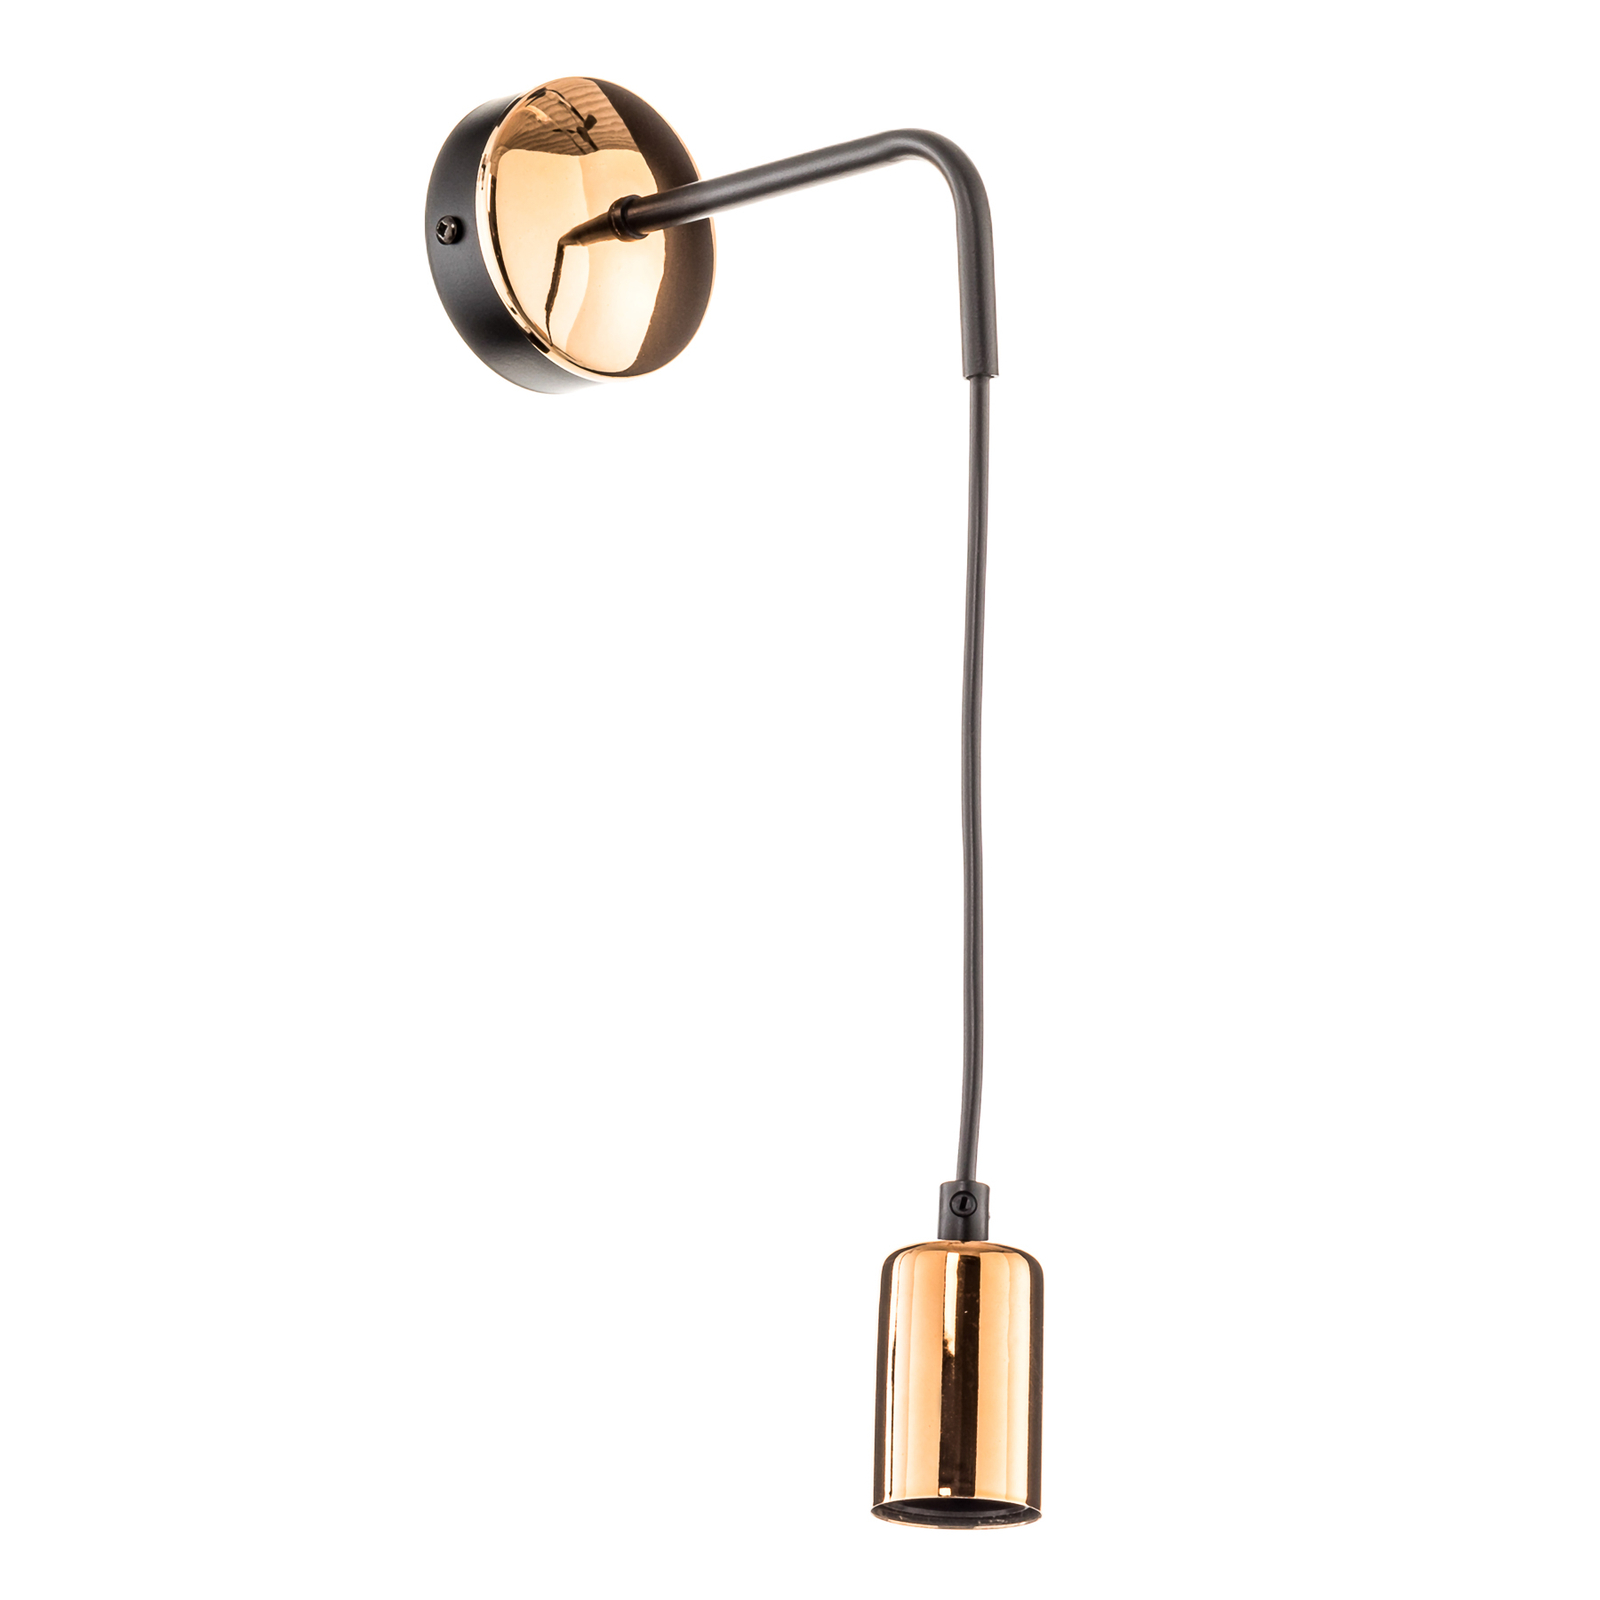 Spark K1 wall light in black and copper